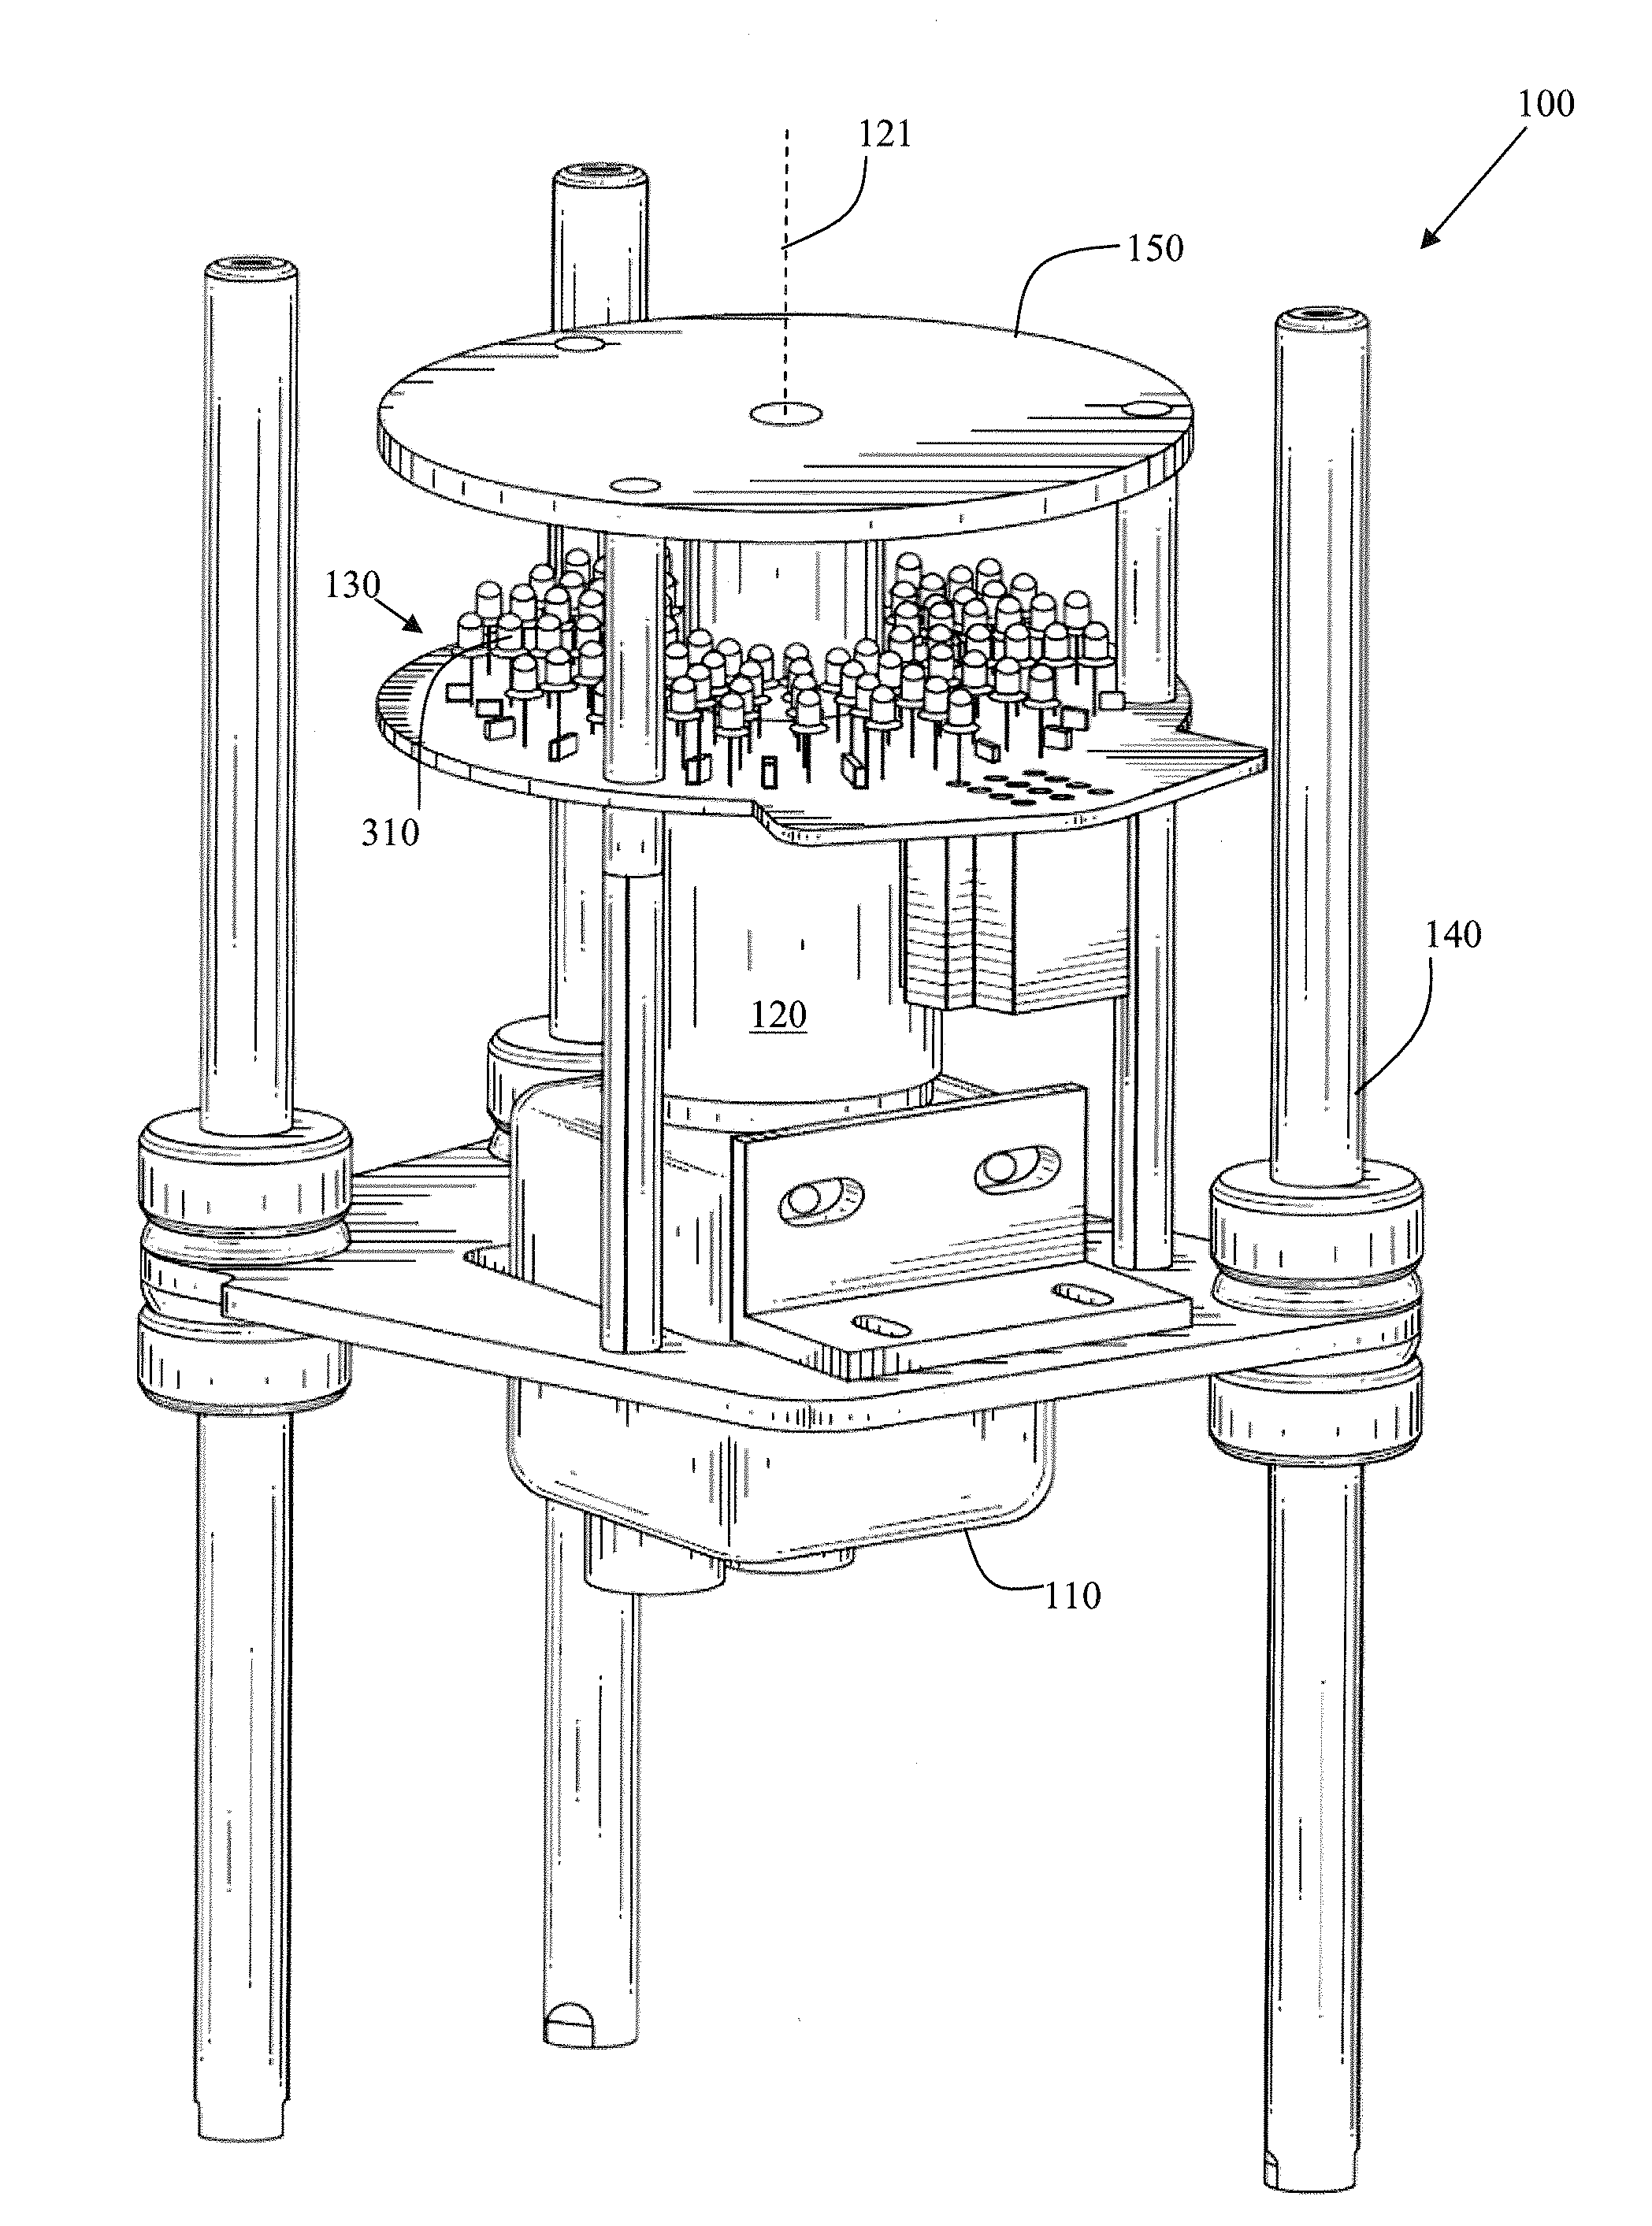 Apparatus and methods for container inspection